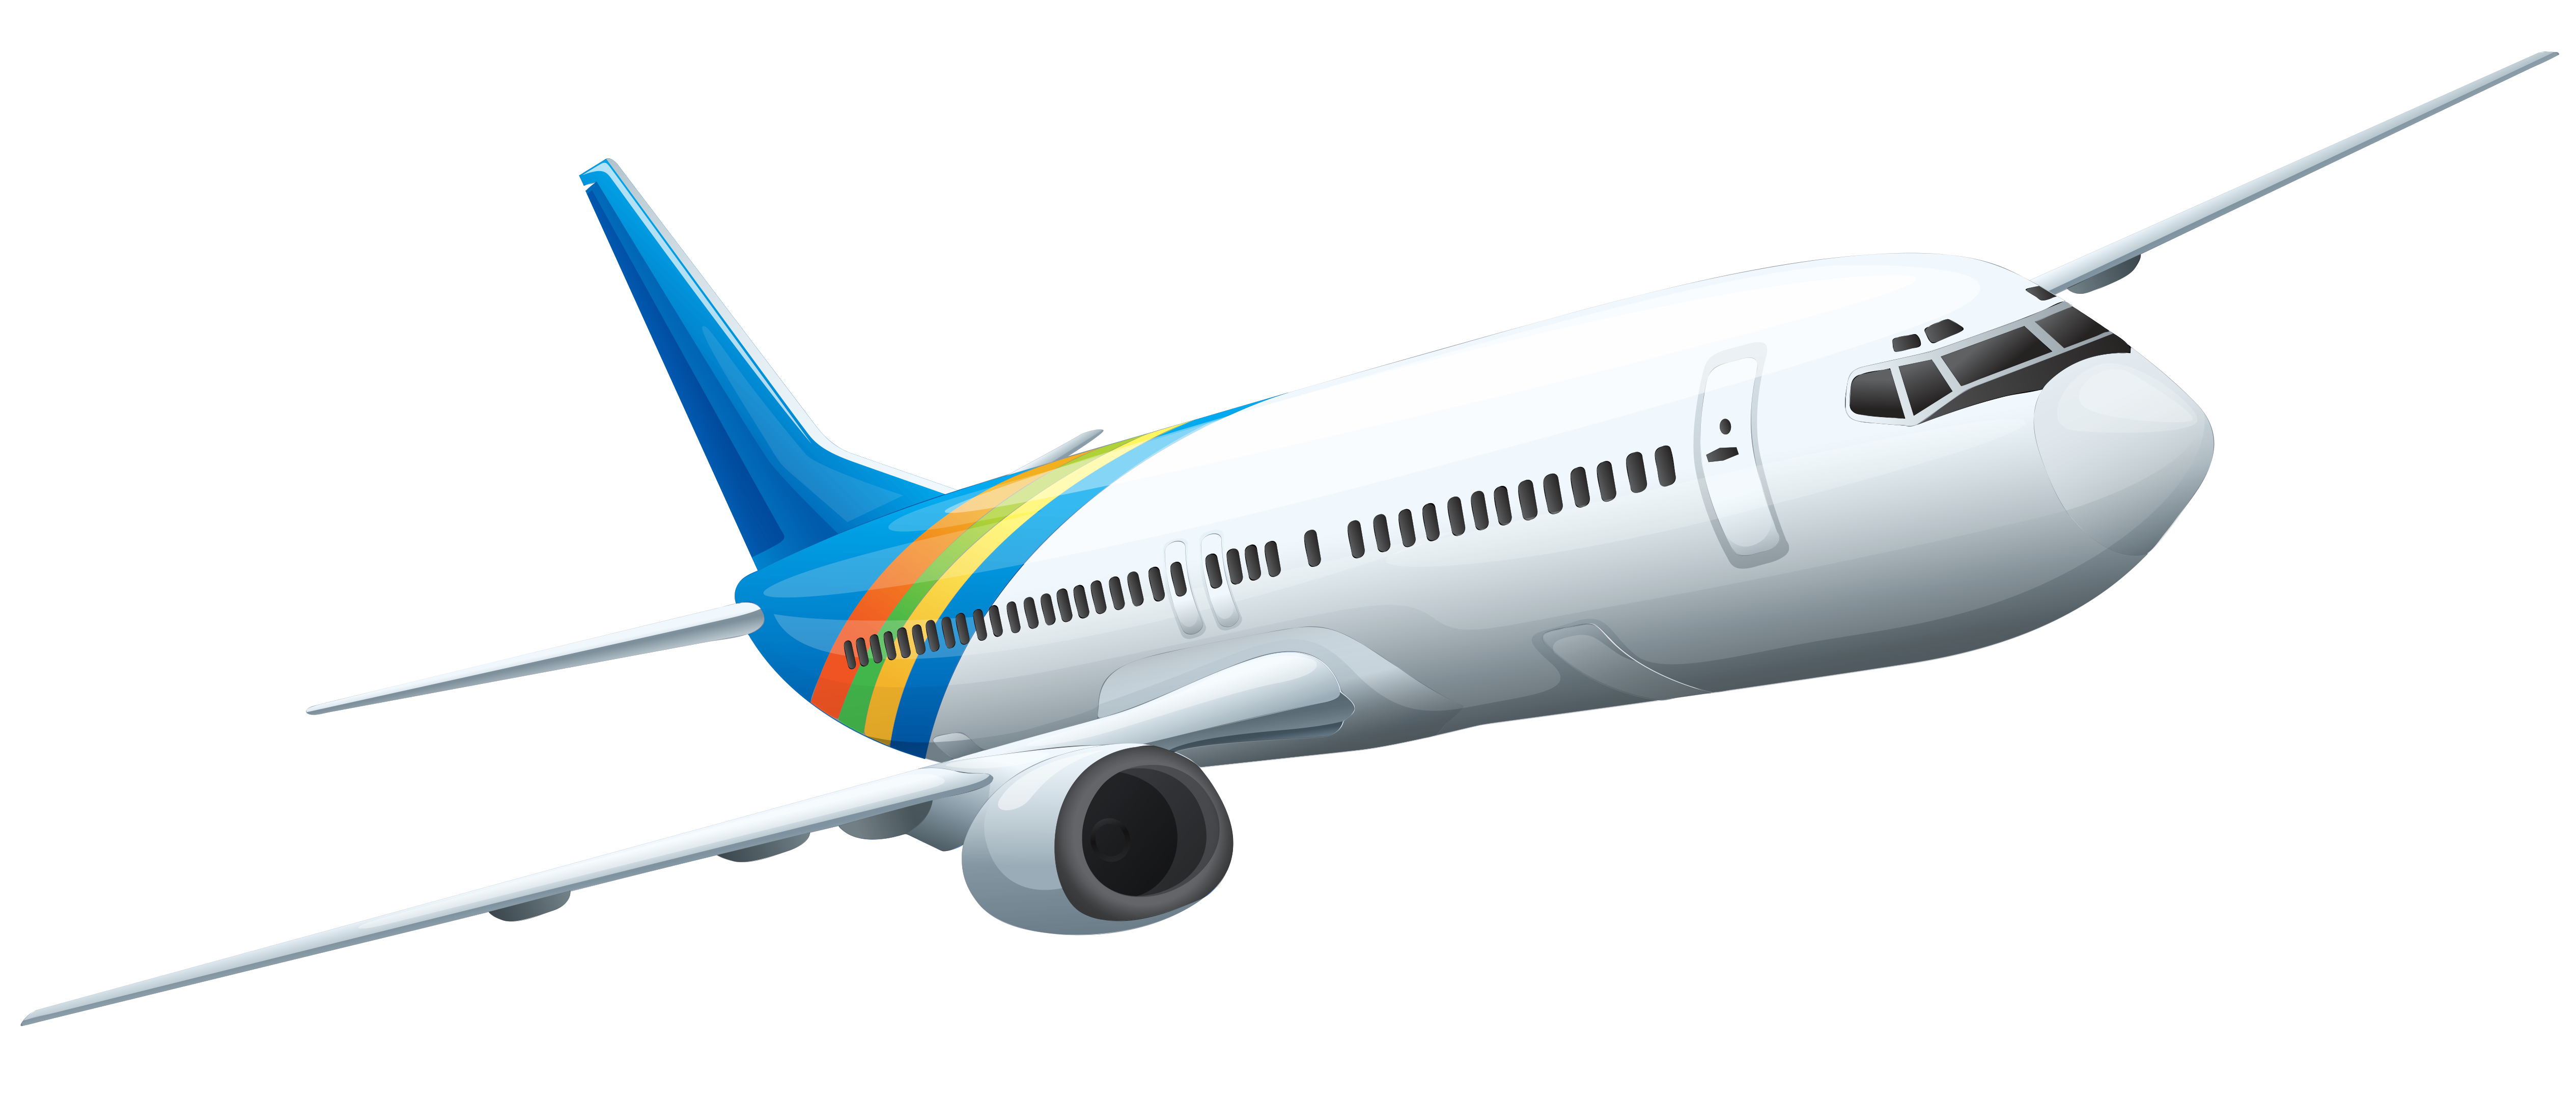 commercial airplane png